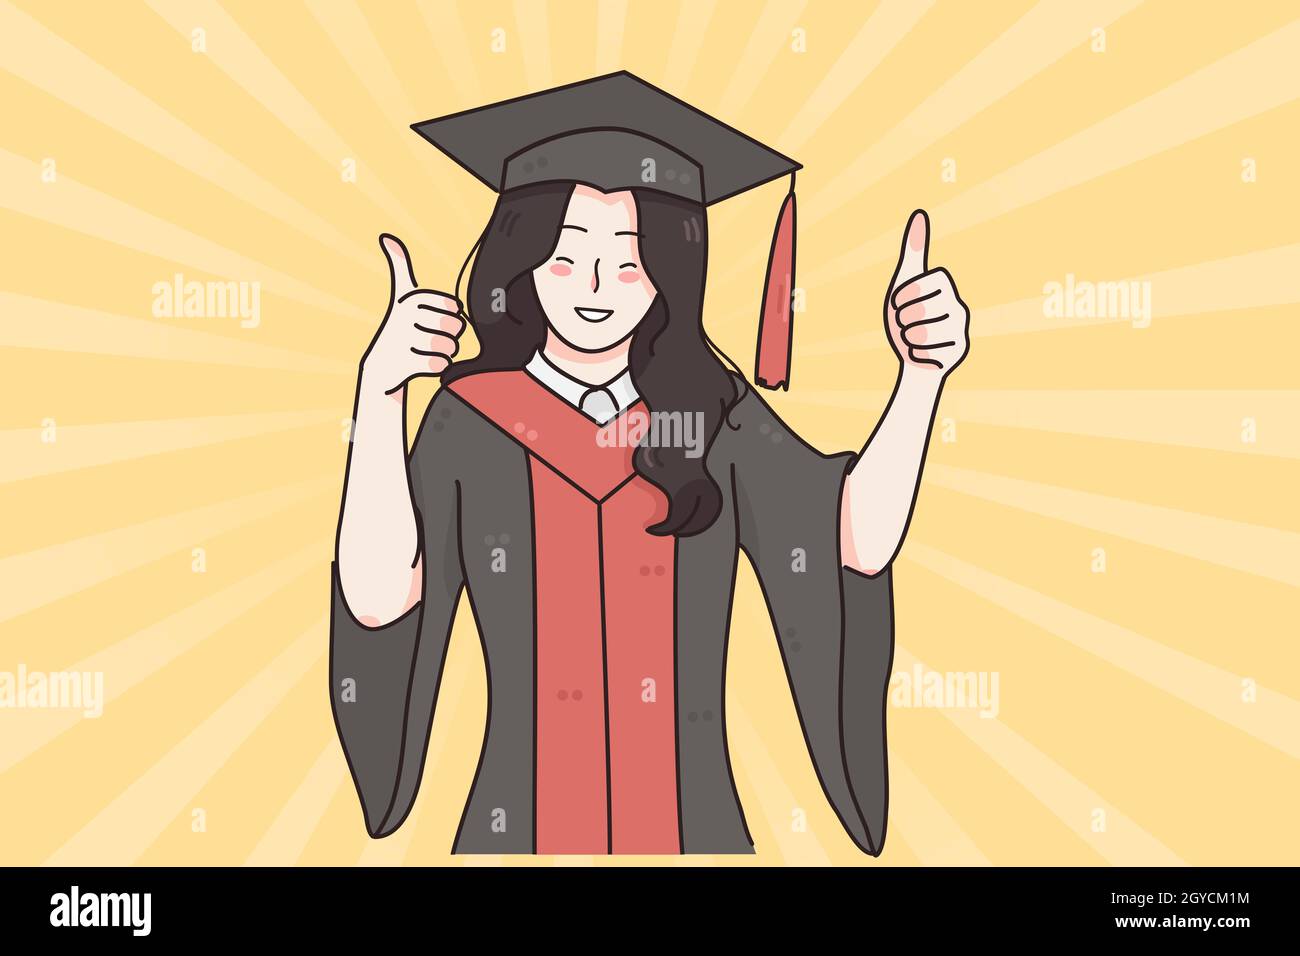 Successful education, graduation from university concept. Young smiling happy girl in traditional bonet and mantle standing showing thumbs up sign fee Stock Photo